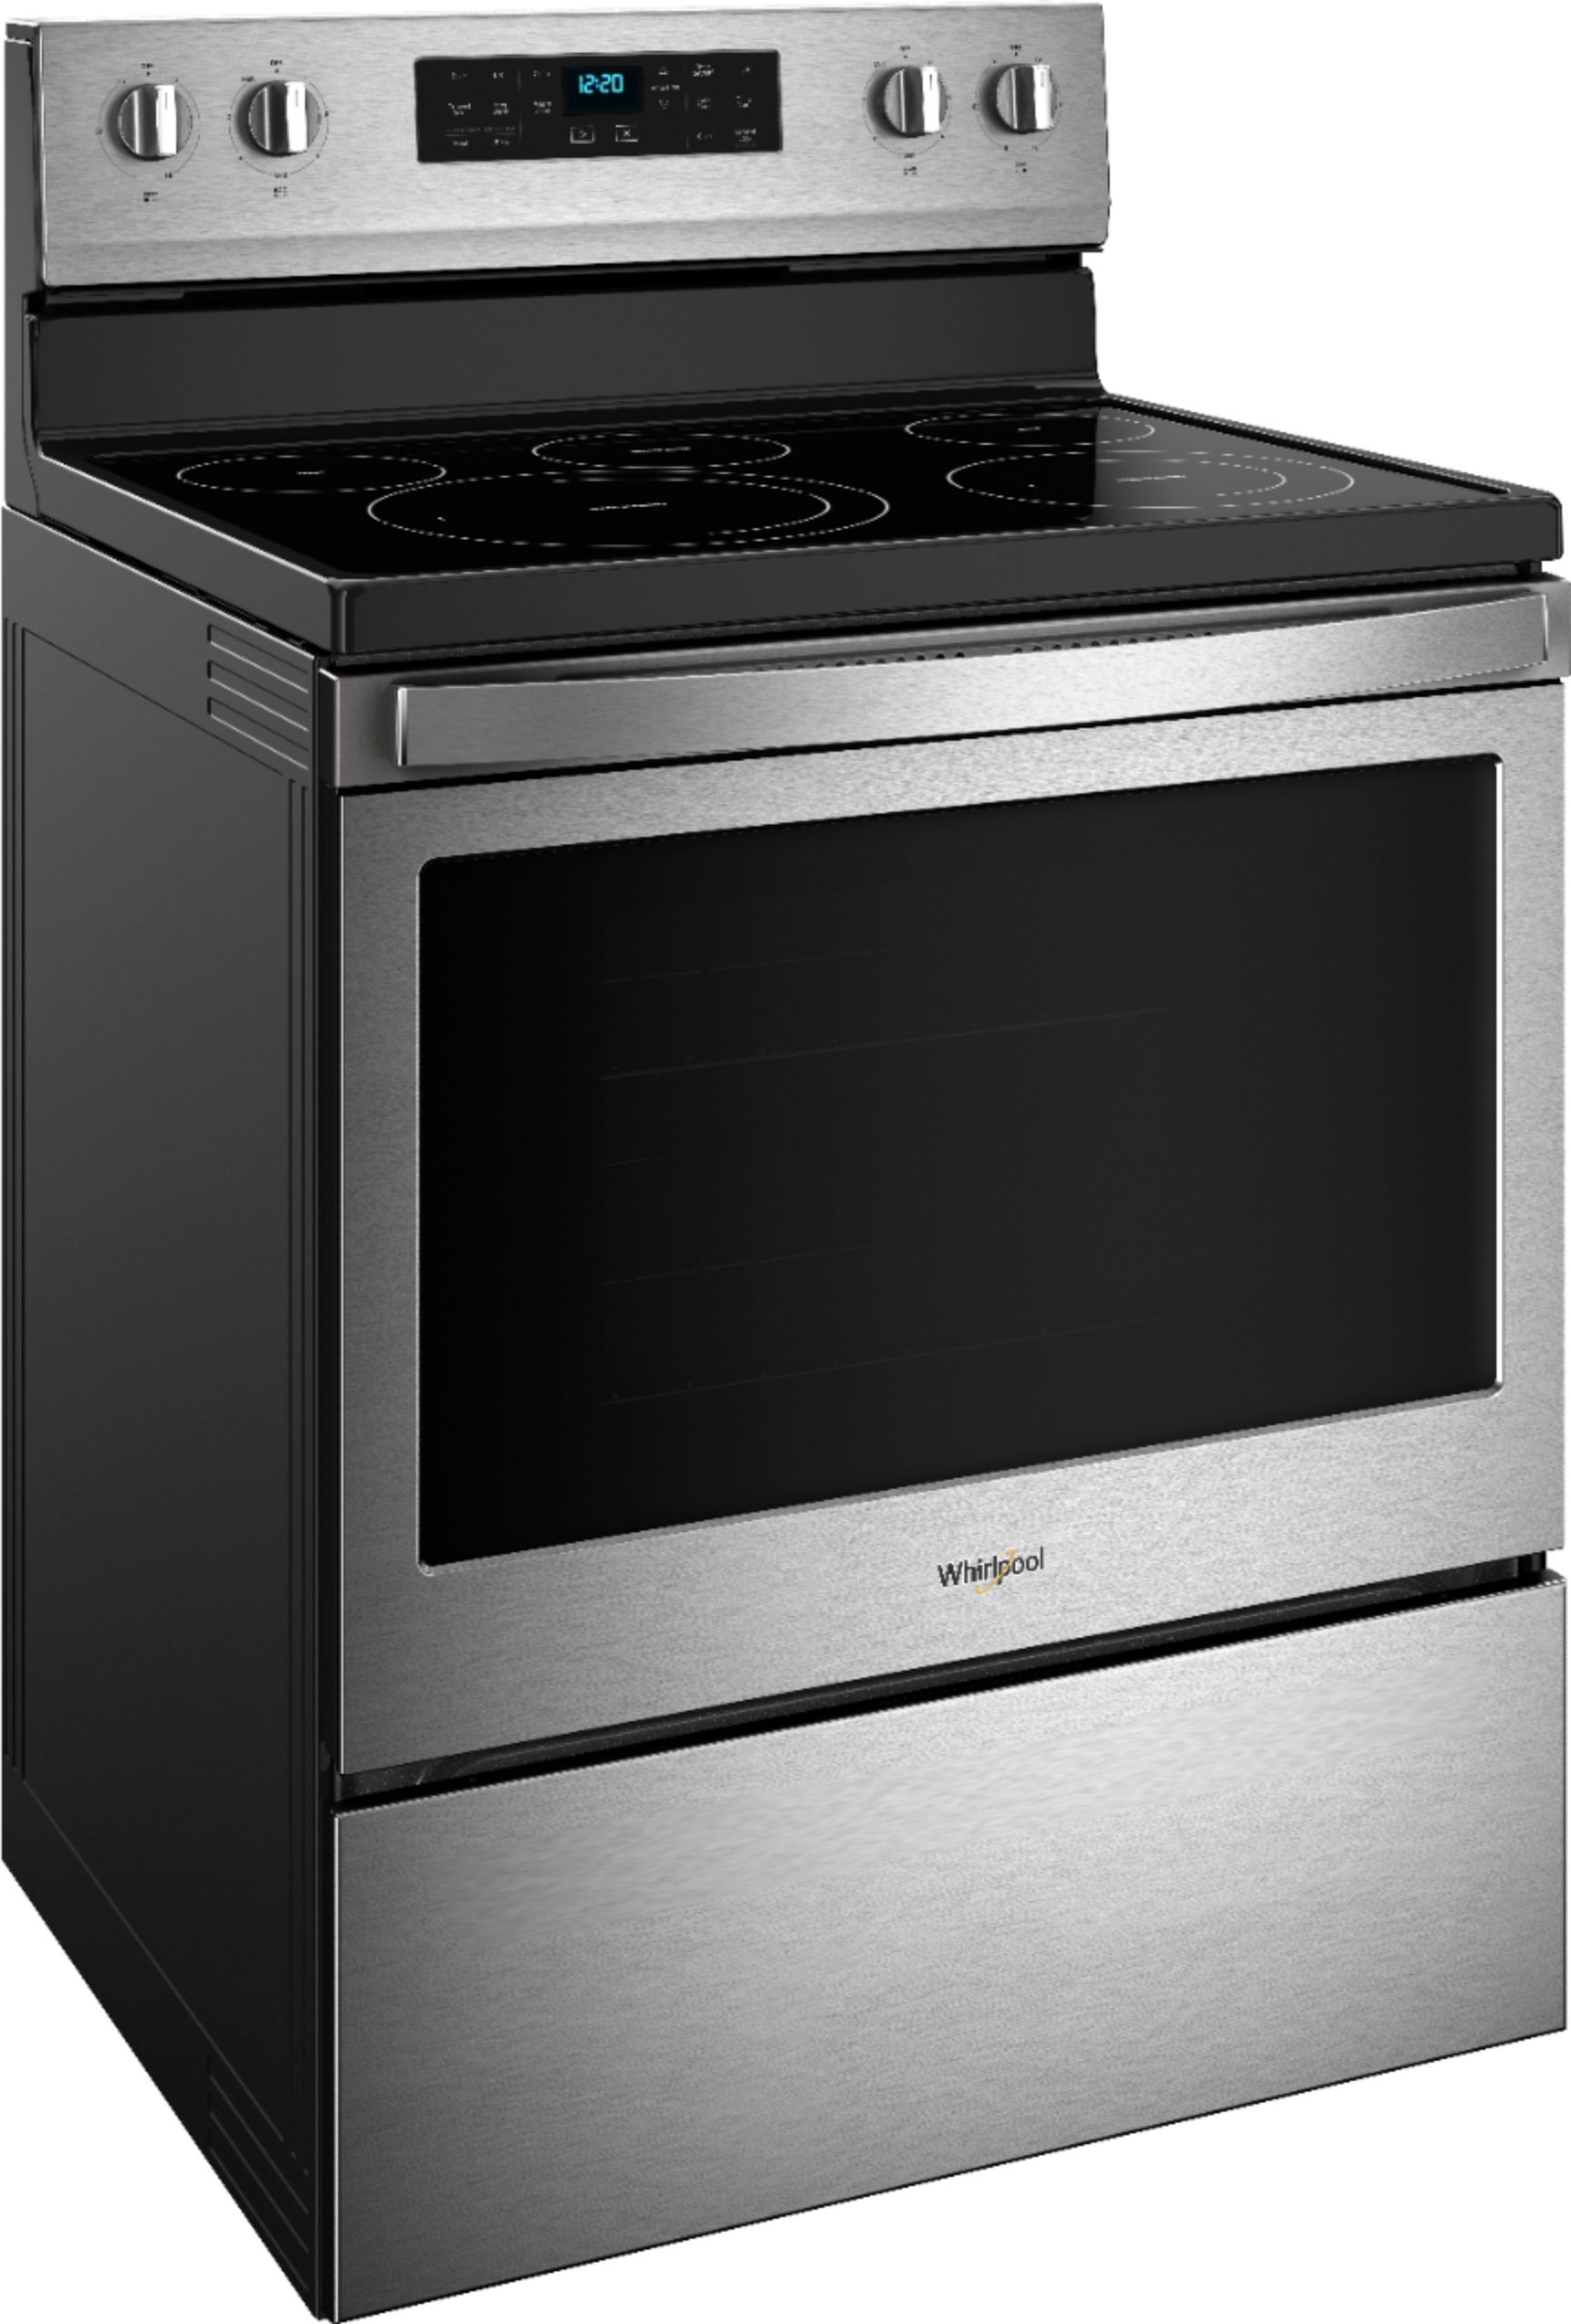 Whirlpool Stainless Steel Stove Electric